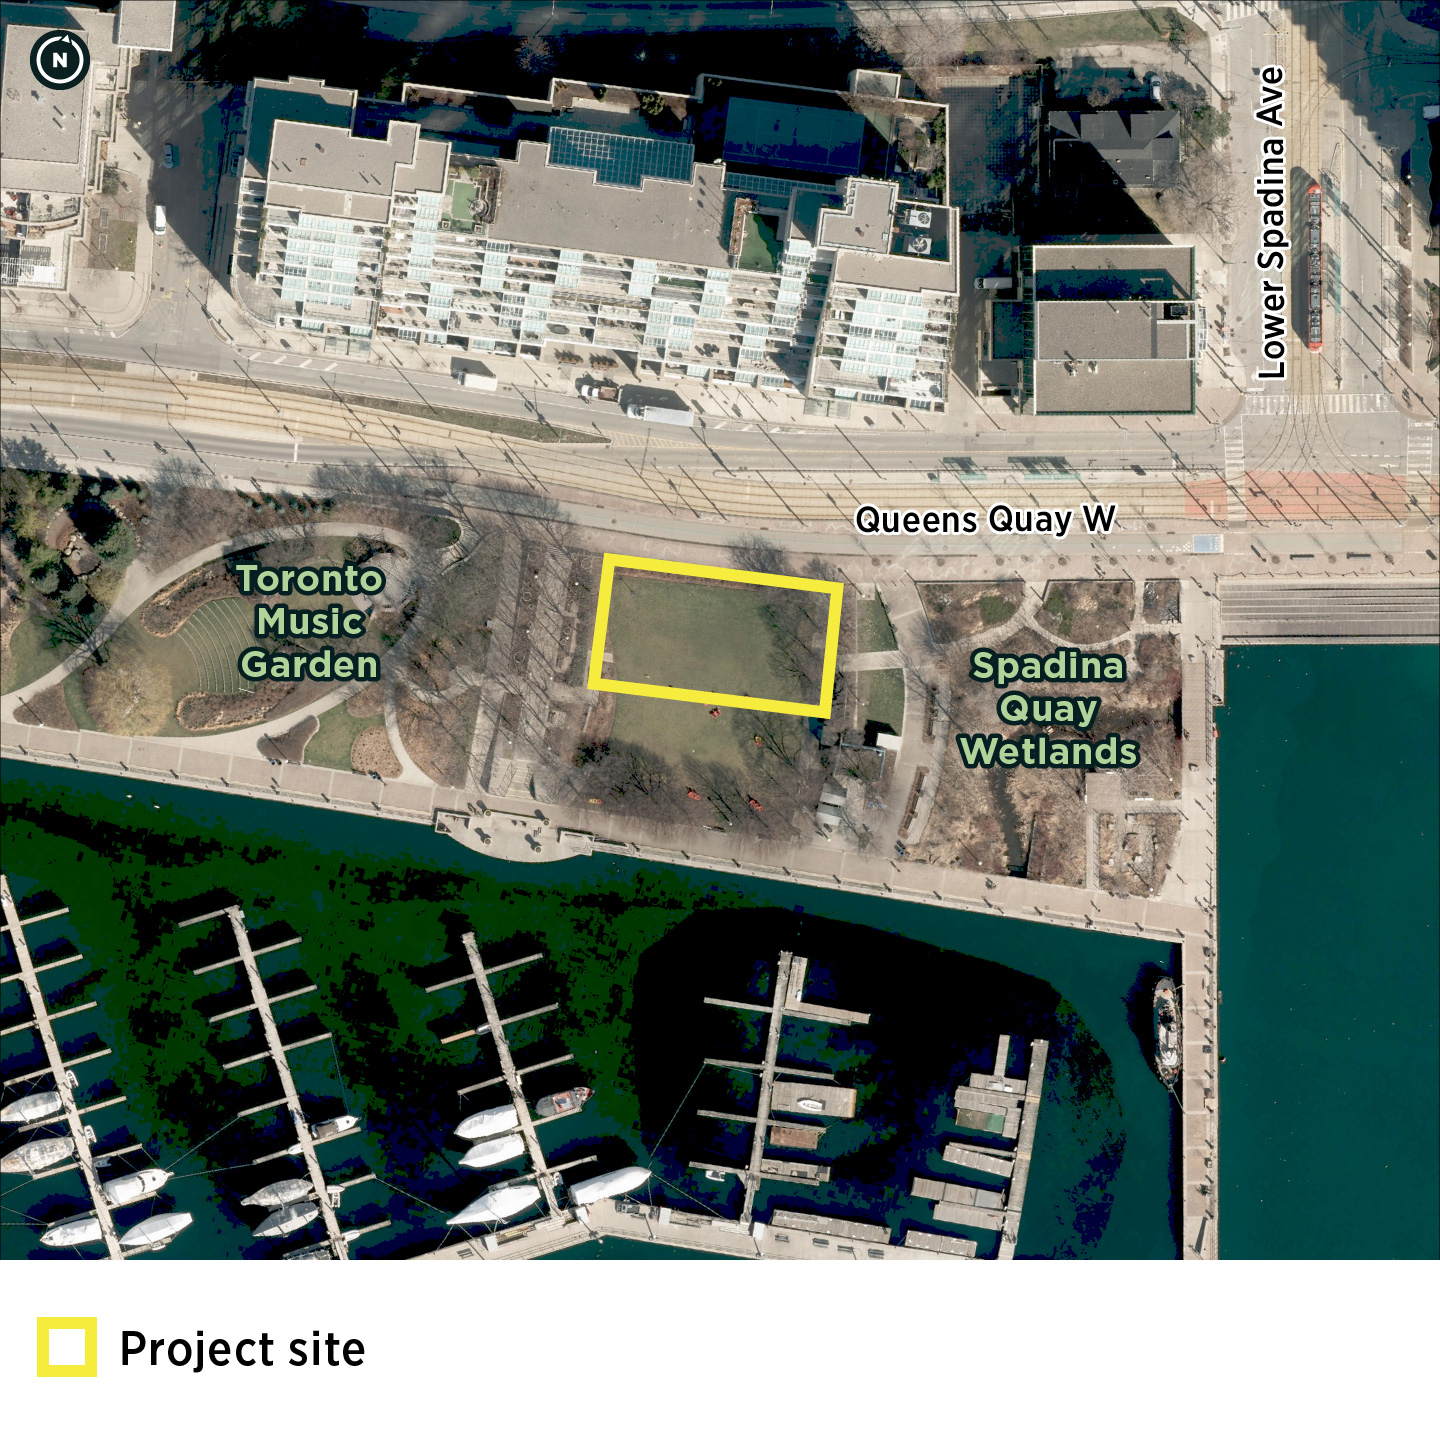 An aerial map illustrating the location of the Terry Fox Legacy art piece with a rectangular yellow box. The location is shown between Toronto Music Garden to the west and Spadina Quay Wetlands to the east. The art piece will be located along Queens Quay West. 